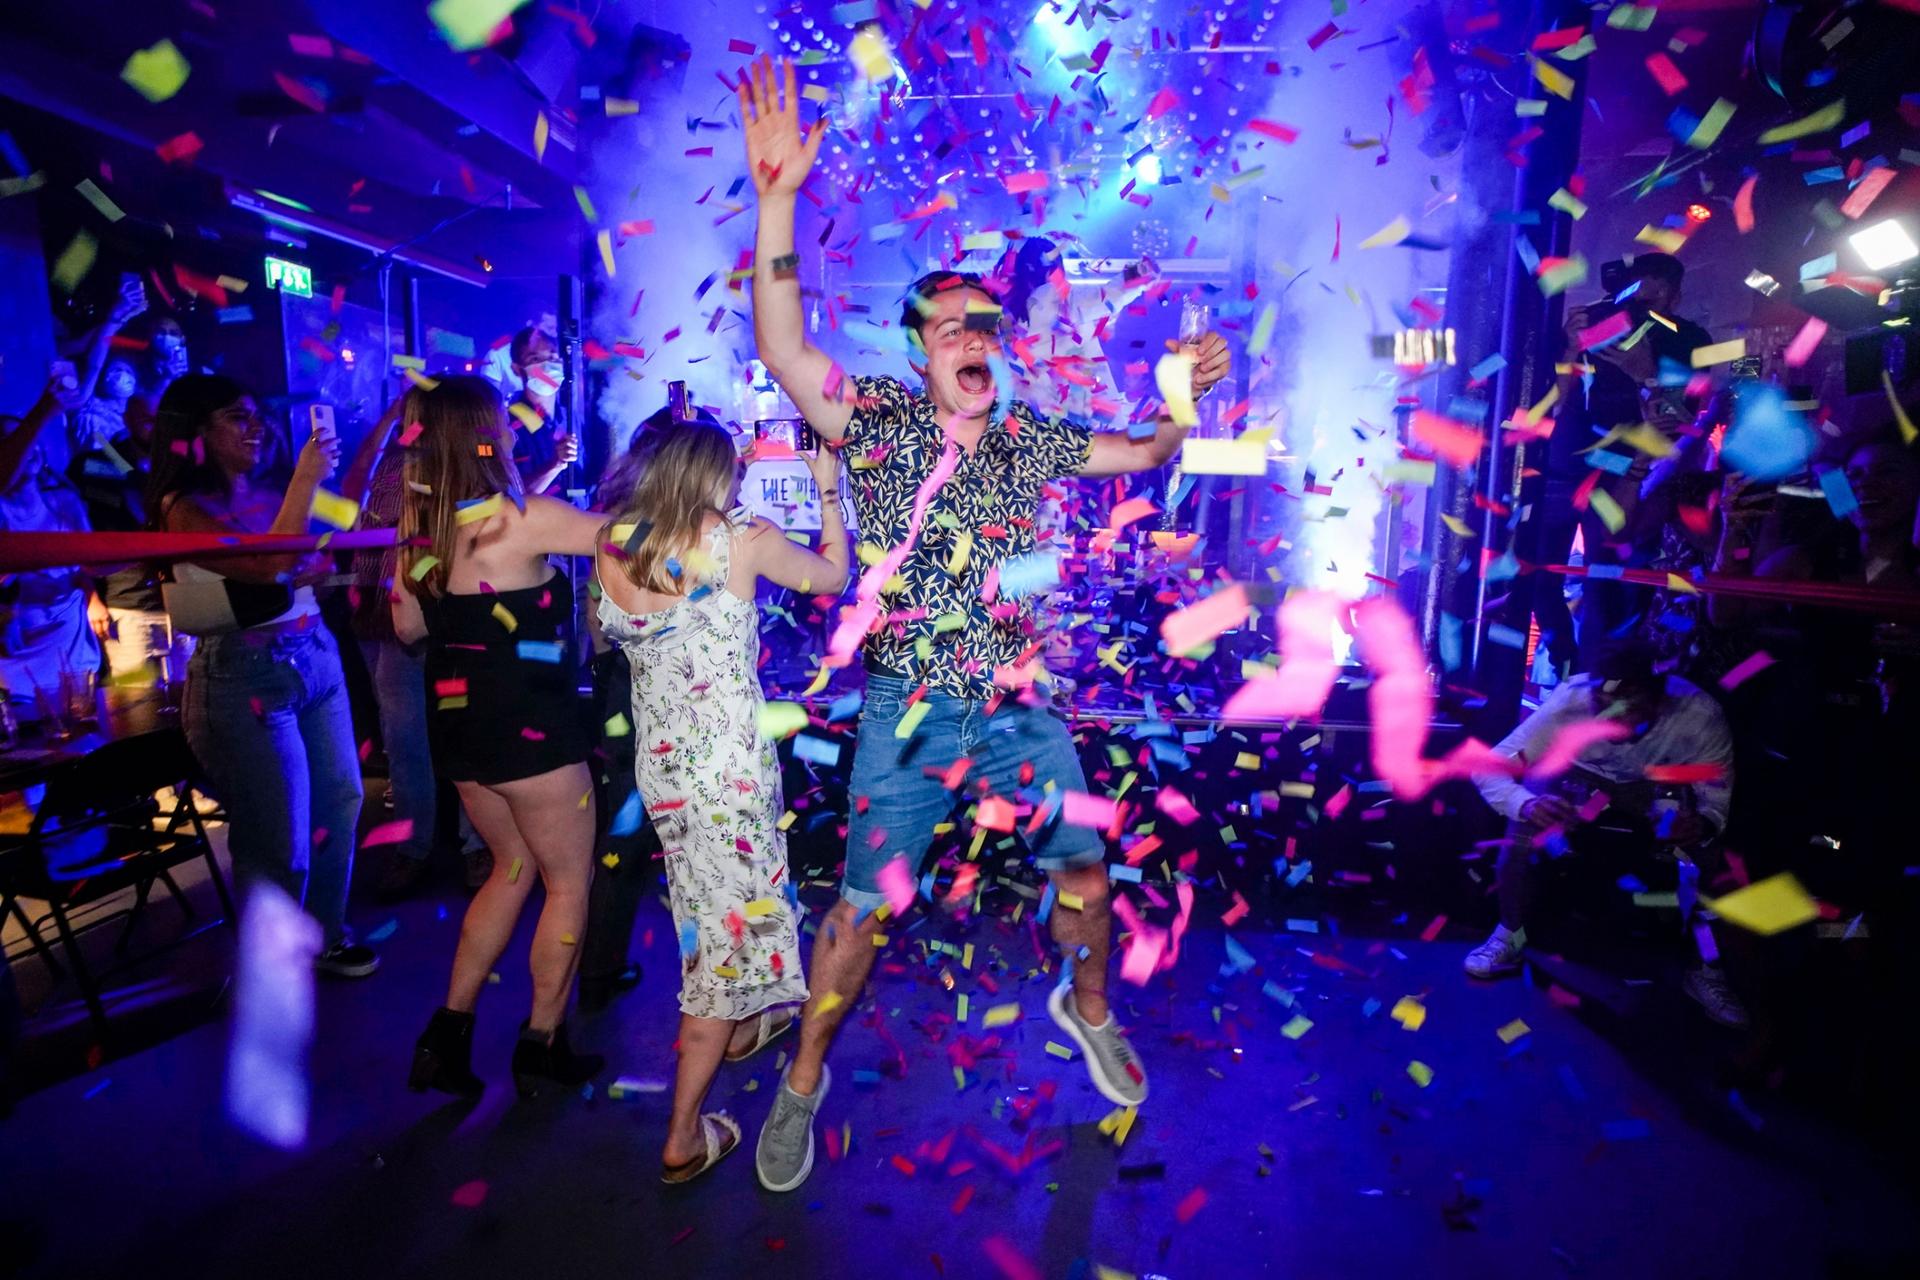 A man is shown jumping in the air amid colorful confetti flying all around.